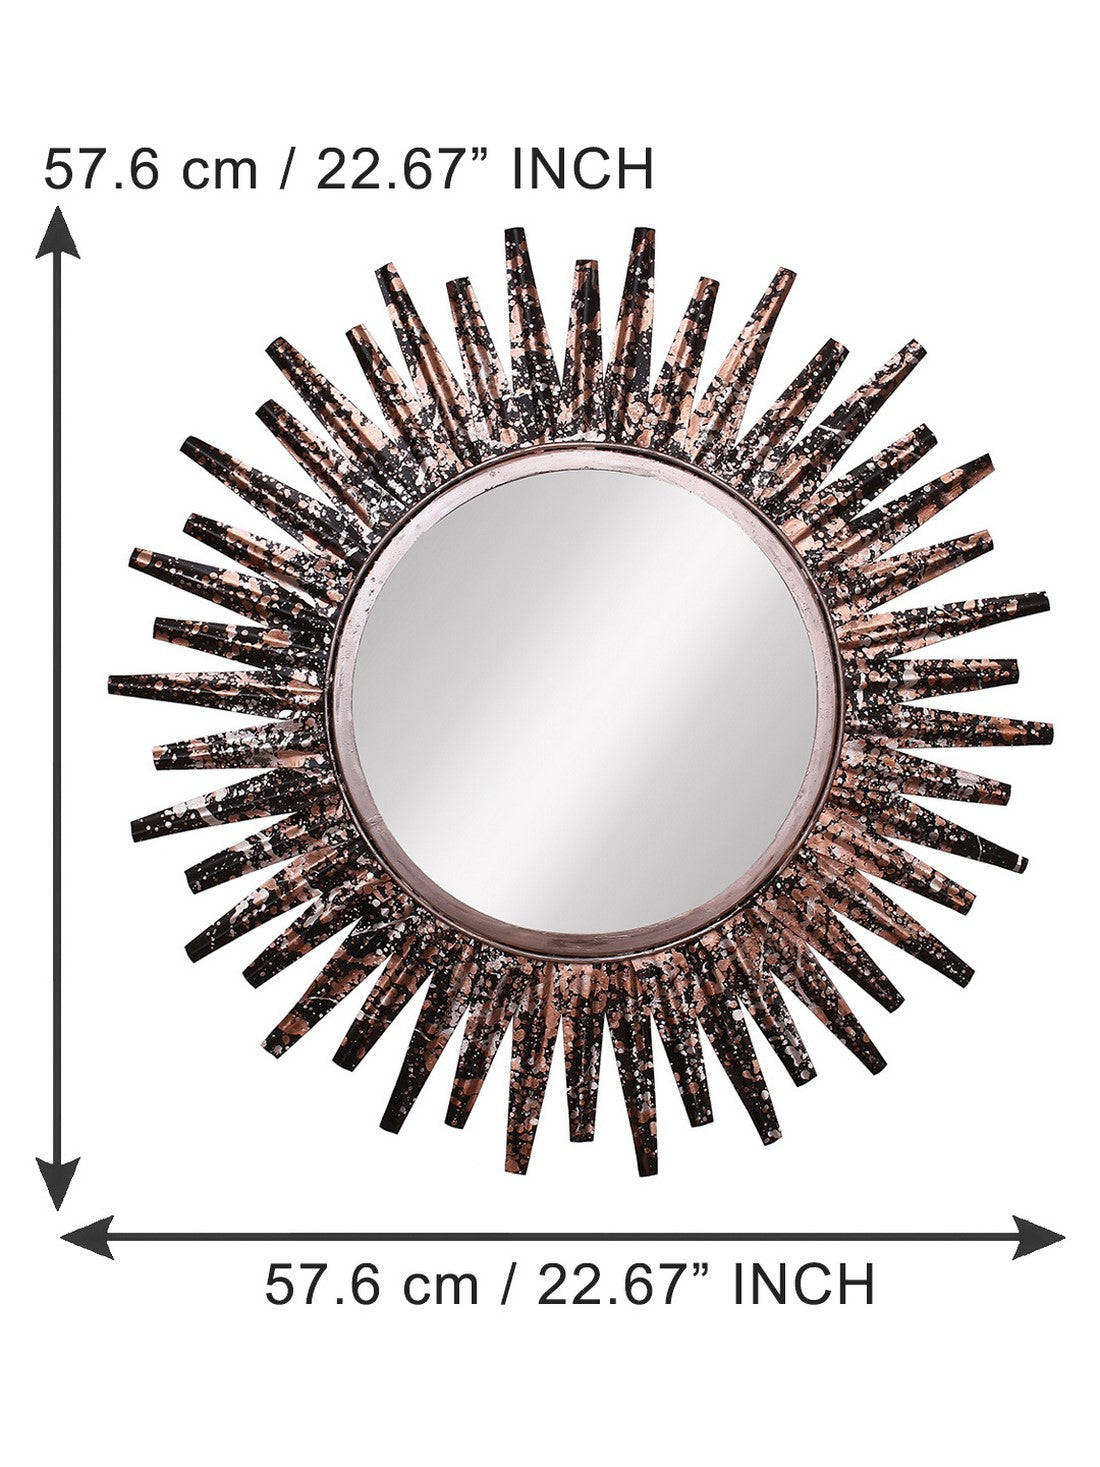 Brown, Copper and Black Decorative Metal Handcarved Wall Mirror 2